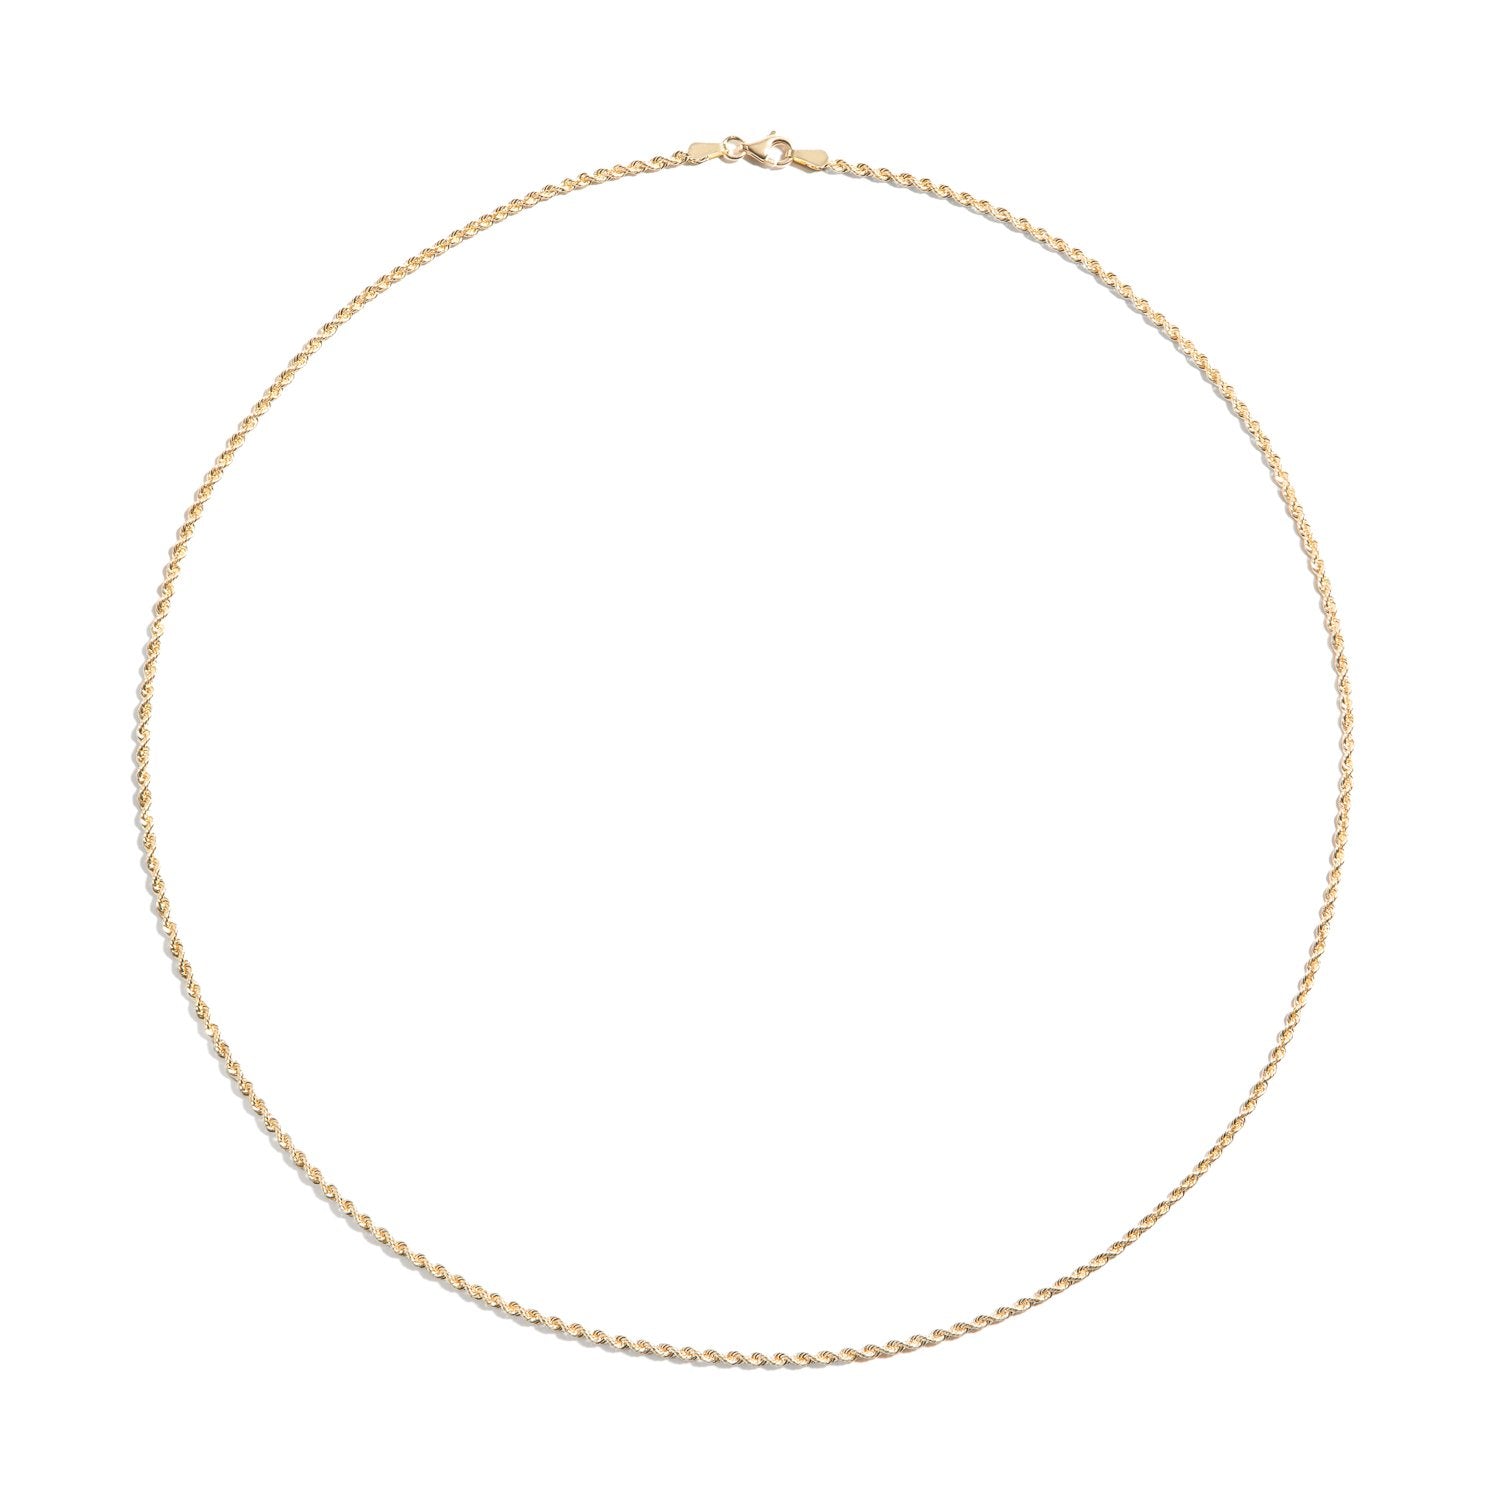 Shahla Karimi 1.8mm Solid Rope Chain 20" 14K Yellow Gold 